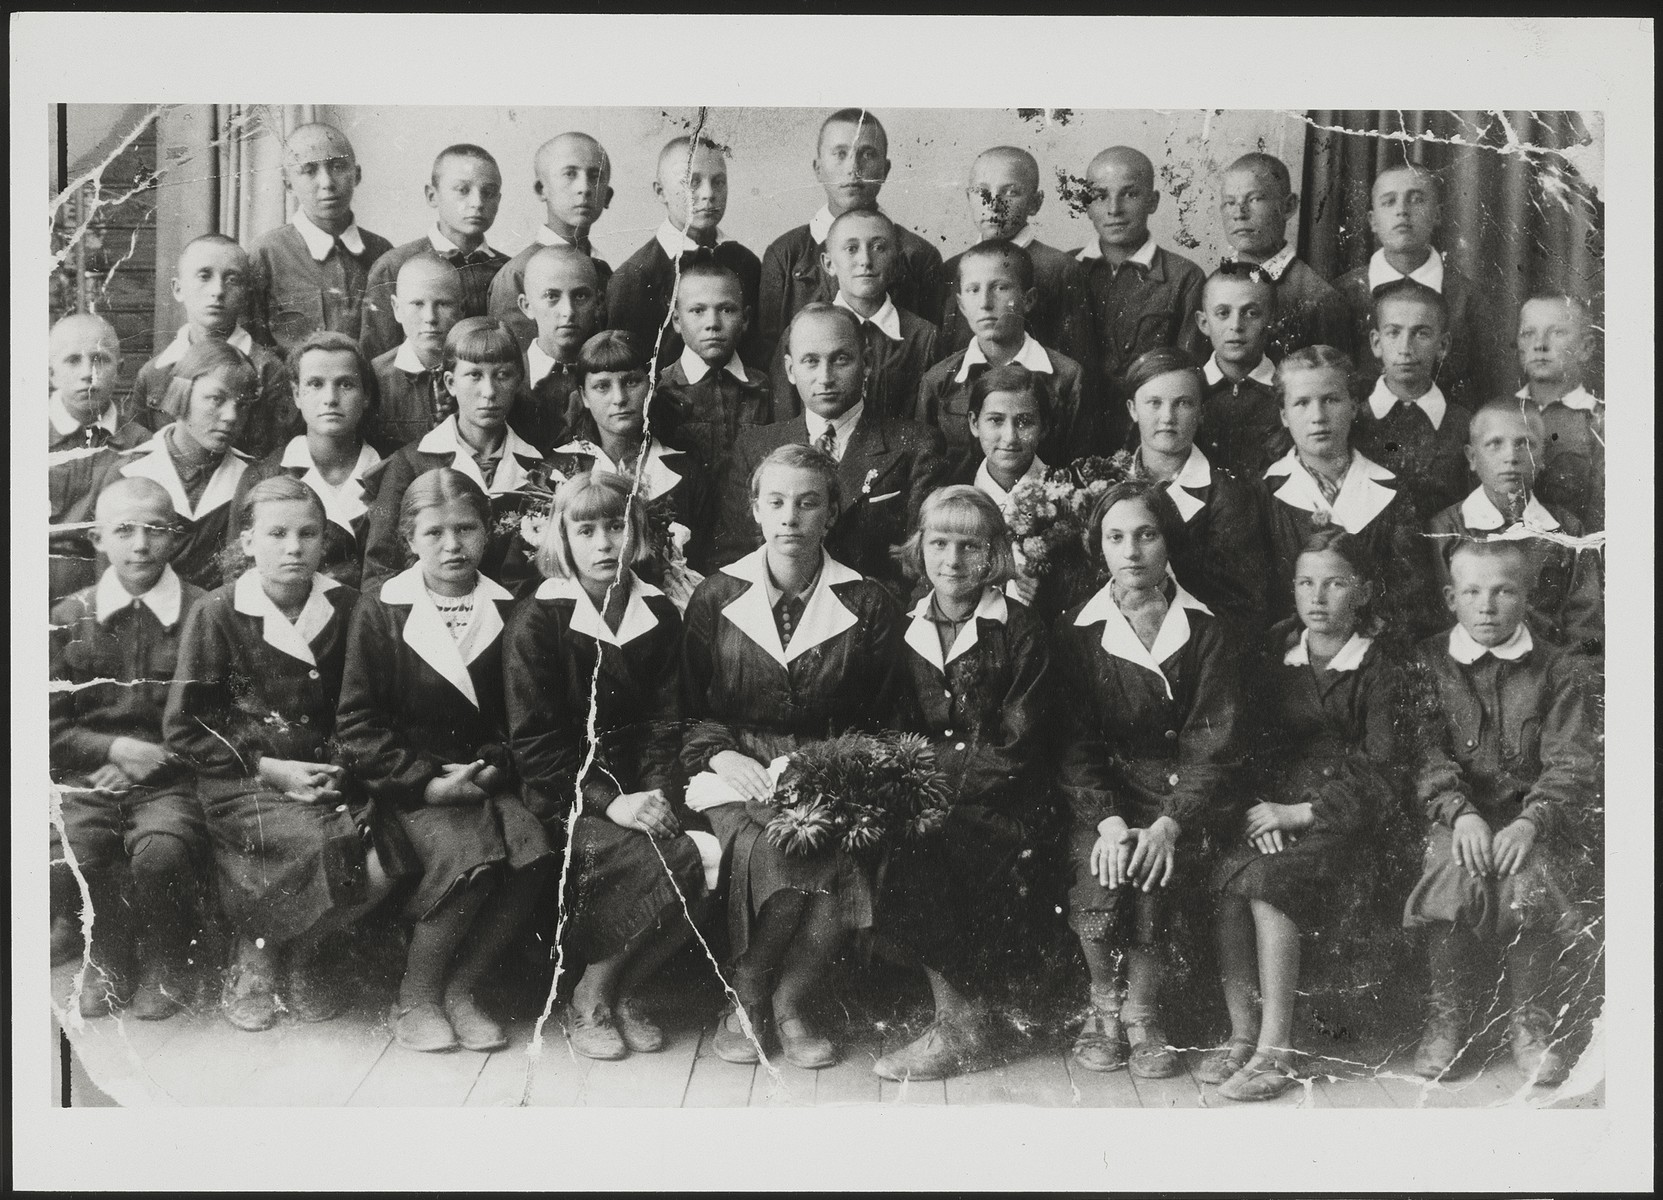 Polish and Jewish children in the Polish public school in Eisiskes. 

Second row from top: second from right is Shlomo Tevke Paikowski; third from right is Leon Kahn, fifth from right is Shmuel Sovitzky (behind the teacher). Third row from top: teacher Antonovicz is sitting in the center (he was a member of the Polish Home Army).  Hayya Levitan (second row from bottom, fourth from right) Front row, third from right is Menuha Michalowski. 

Leon Kahn survived the Holocaust. All the other Jewish children were murdered during the Holocaust.